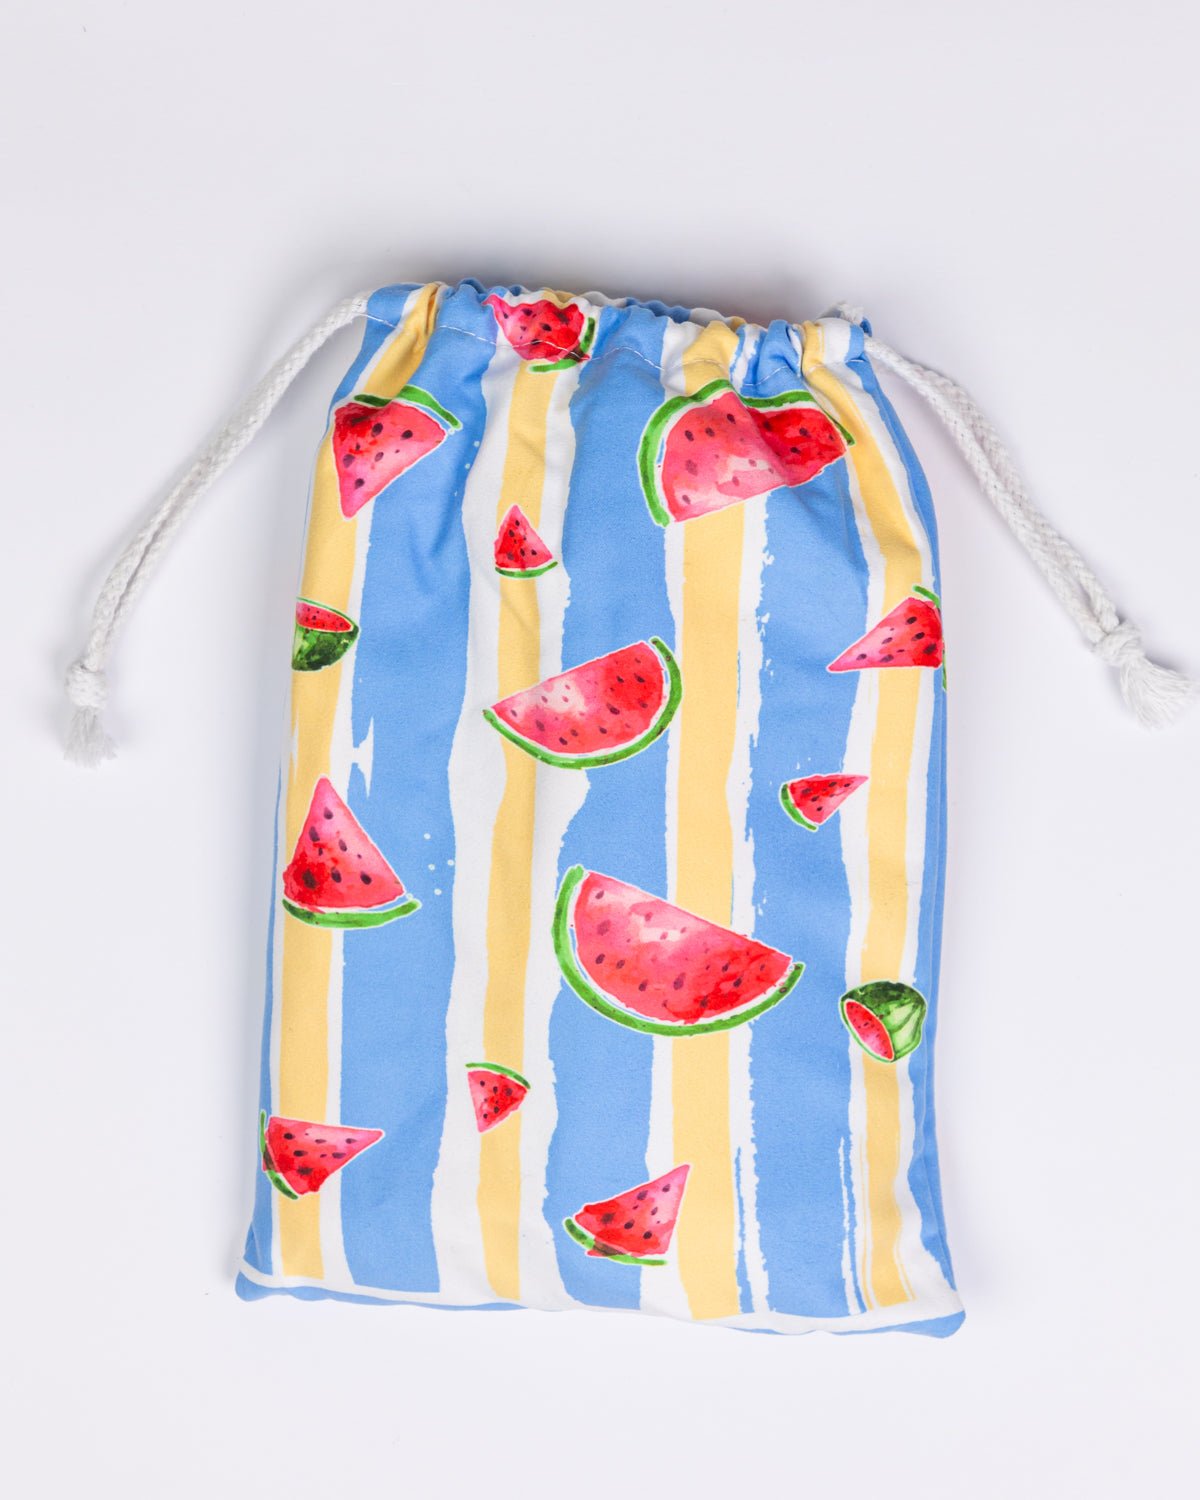 A Quick Dry, Sand Free, Light Weight, Compact and Ecofriendly Microfiber Beach Towel Pouch from La Toalla with a watermelon design